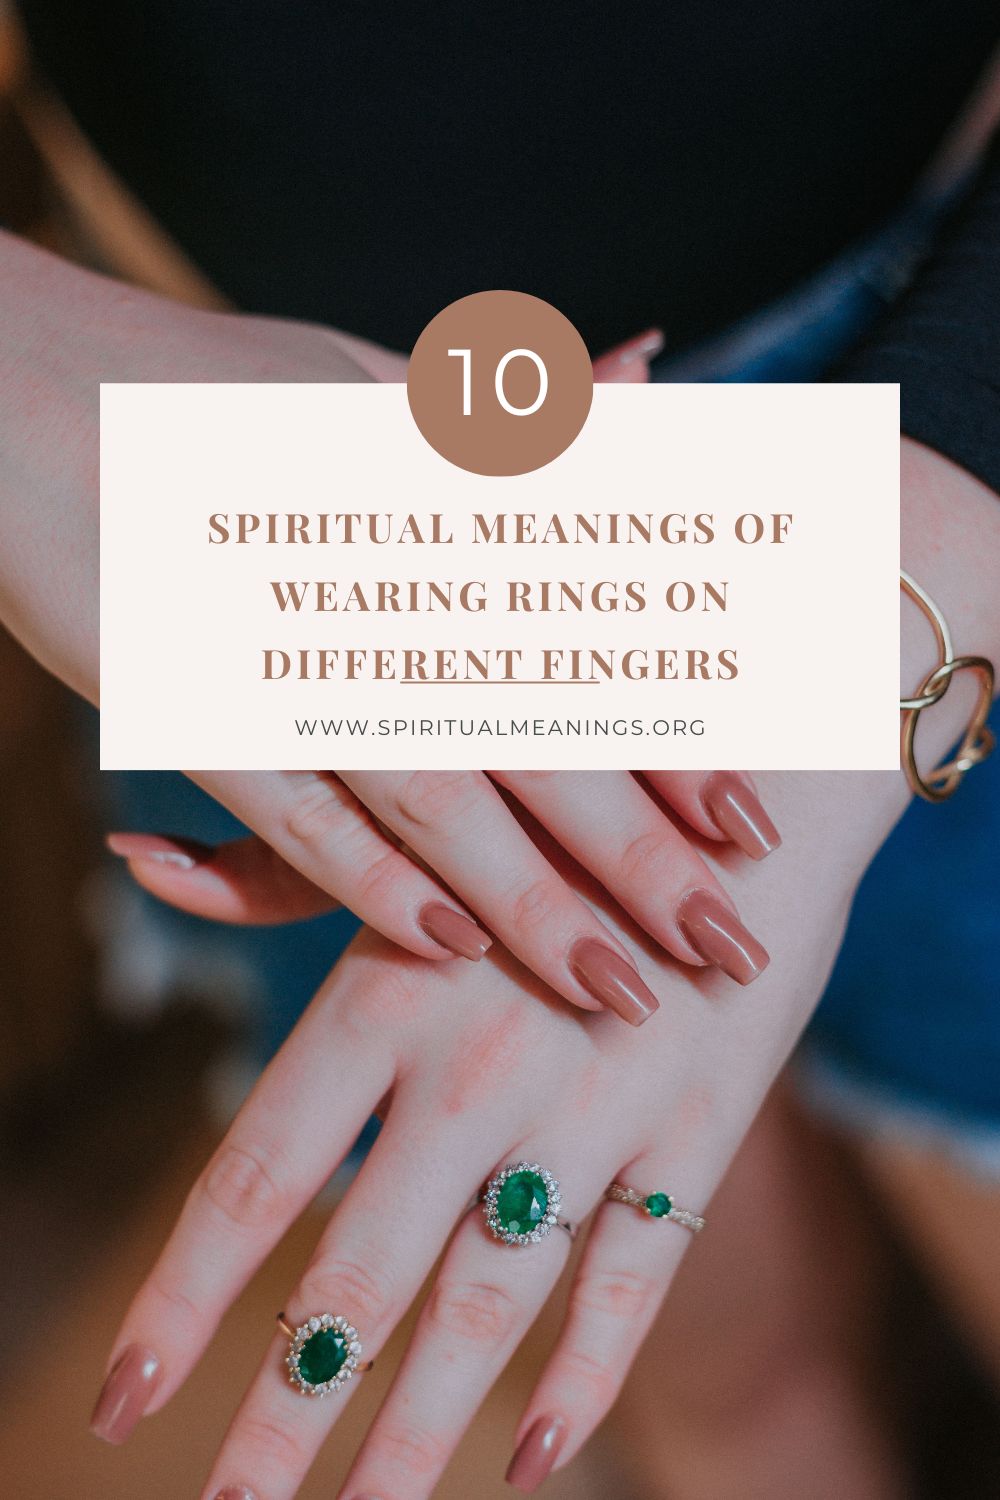 The Spiritual Meanings of Wearing Rings on Different Fingers (10 Meanings) pin